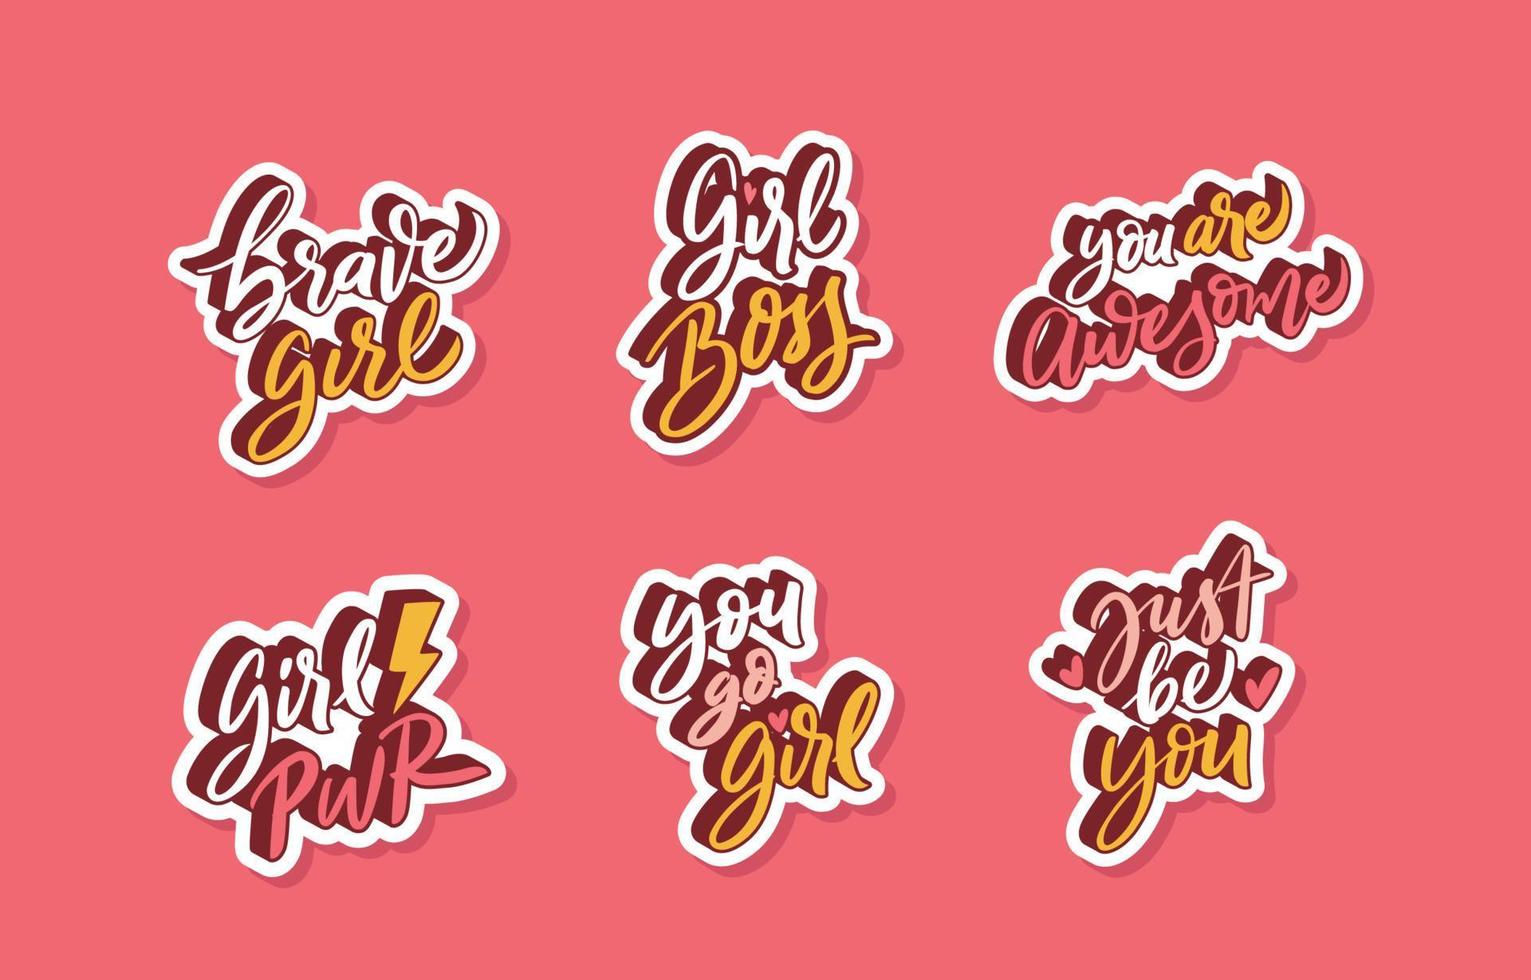 Women's Equality Sticker with Hand Lettering Concept vector